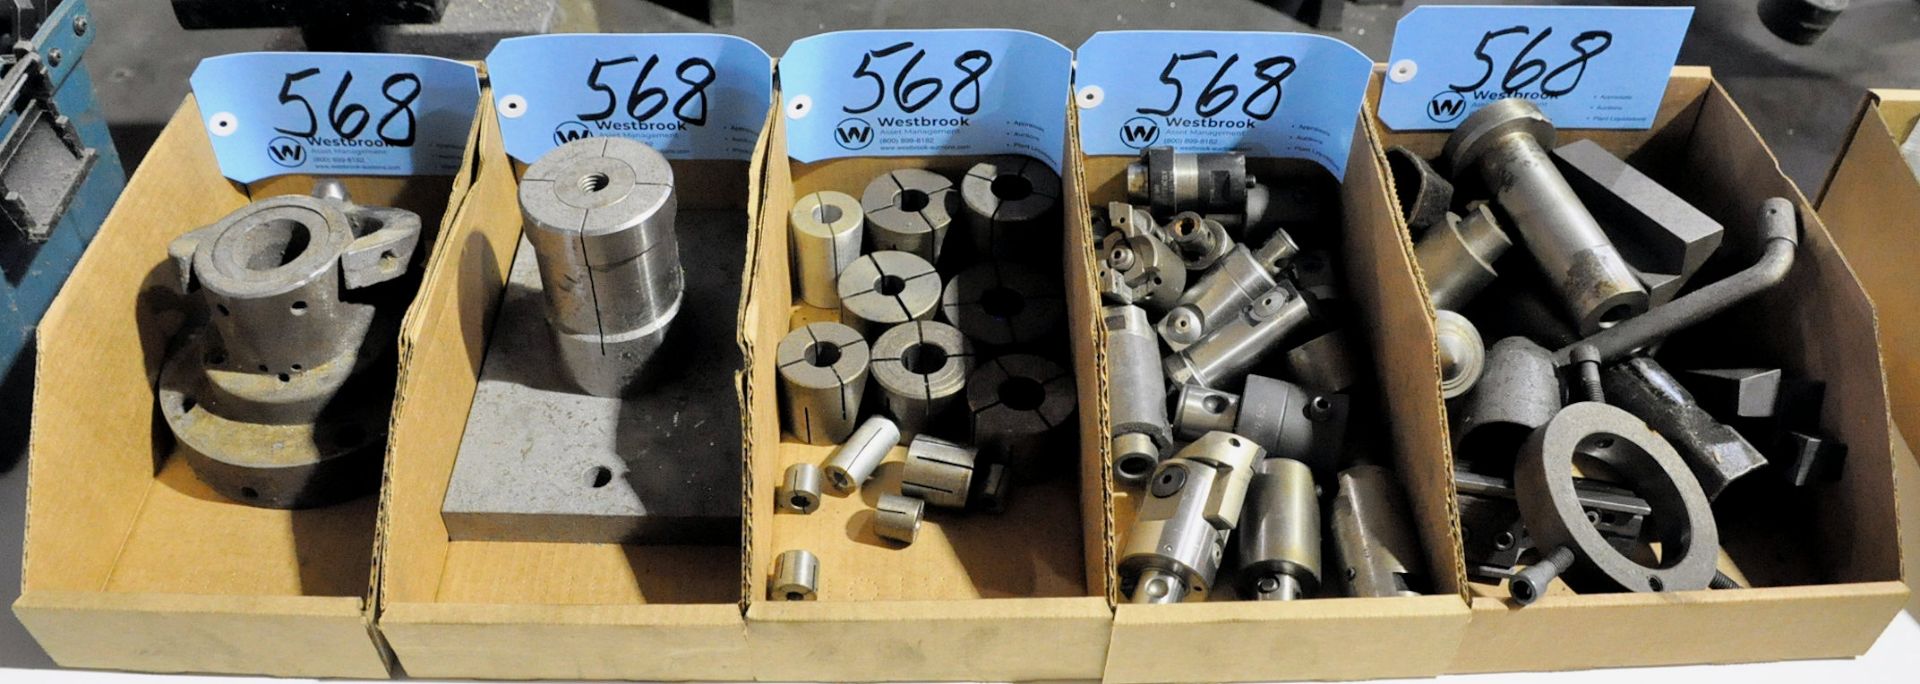 Lot-Various Tooling in (5) Boxes